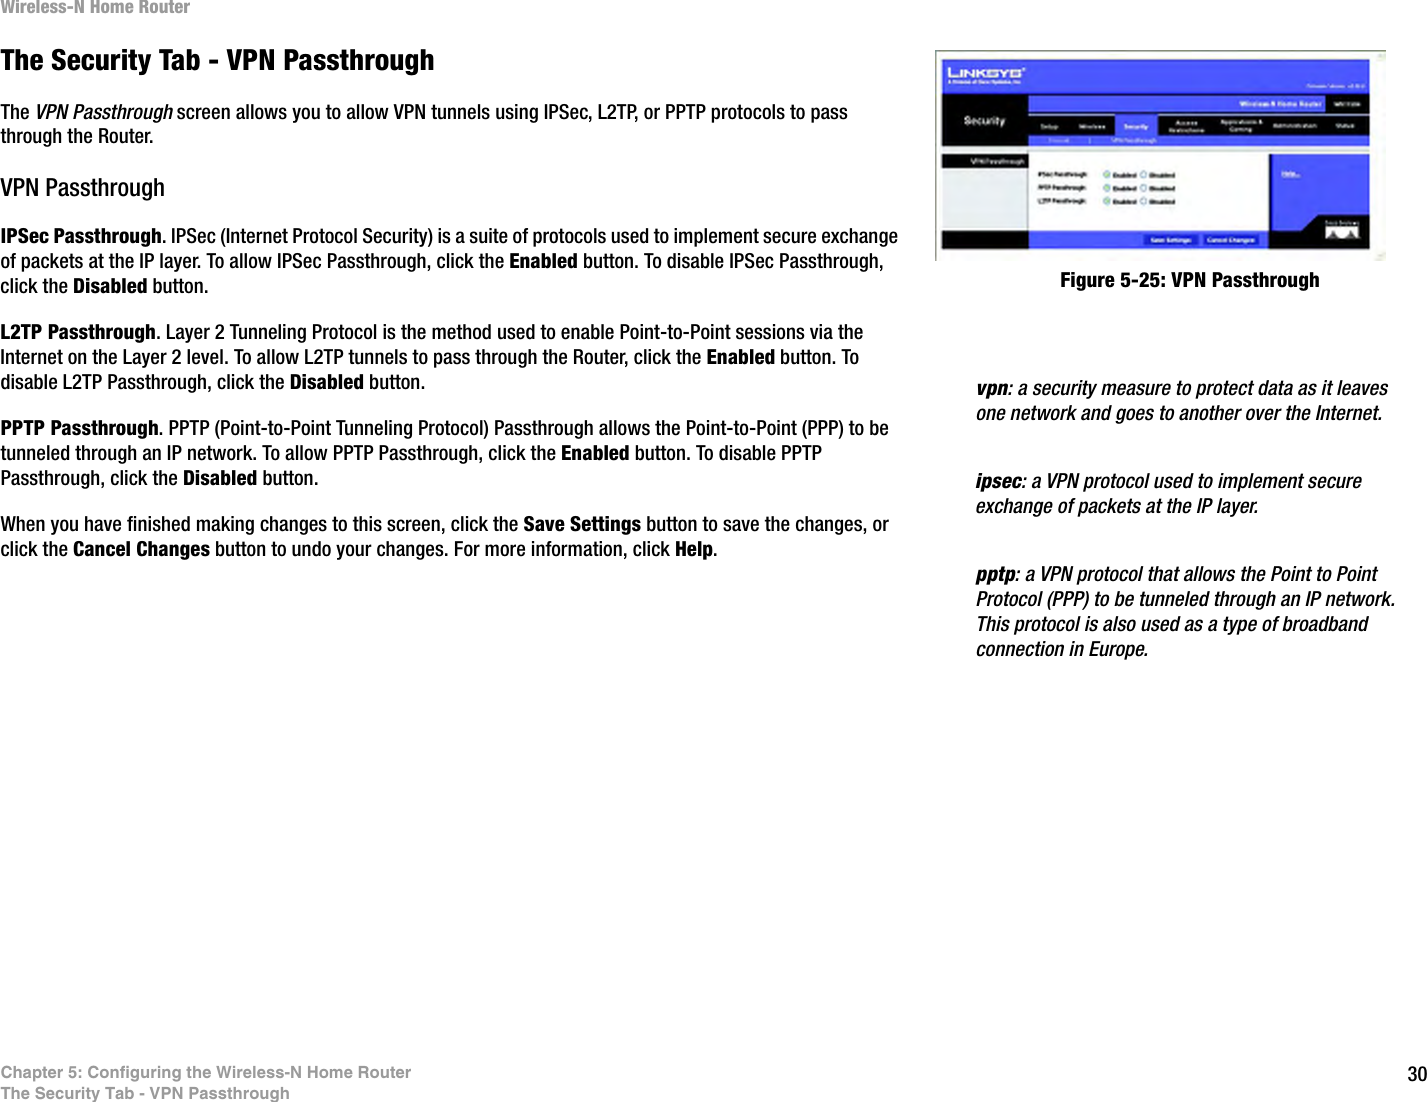 30Chapter 5: Configuring the Wireless-N Home RouterThe Security Tab - VPN PassthroughWireless-N Home RouterThe Security Tab - VPN PassthroughThe VPN Passthrough screen allows you to allow VPN tunnels using IPSec, L2TP, or PPTP protocols to pass through the Router.VPN PassthroughIPSec Passthrough. IPSec (Internet Protocol Security) is a suite of protocols used to implement secure exchange of packets at the IP layer. To allow IPSec Passthrough, click the Enabled button. To disable IPSec Passthrough, click the Disabled button.L2TP Passthrough. Layer 2 Tunneling Protocol is the method used to enable Point-to-Point sessions via the Internet on the Layer 2 level. To allow L2TP tunnels to pass through the Router, click the Enabled button. To disable L2TP Passthrough, click the Disabled button.PPTP Passthrough. PPTP (Point-to-Point Tunneling Protocol) Passthrough allows the Point-to-Point (PPP) to be tunneled through an IP network. To allow PPTP Passthrough, click the Enabled button. To disable PPTP Passthrough, click the Disabled button.When you have finished making changes to this screen, click the Save Settings button to save the changes, or click the Cancel Changes button to undo your changes. For more information, click Help.Figure 5-25: VPN Passthroughipsec: a VPN protocol used to implement secure exchange of packets at the IP layer.pptp: a VPN protocol that allows the Point to Point Protocol (PPP) to be tunneled through an IP network. This protocol is also used as a type of broadband connection in Europe.vpn: a security measure to protect data as it leaves one network and goes to another over the Internet.